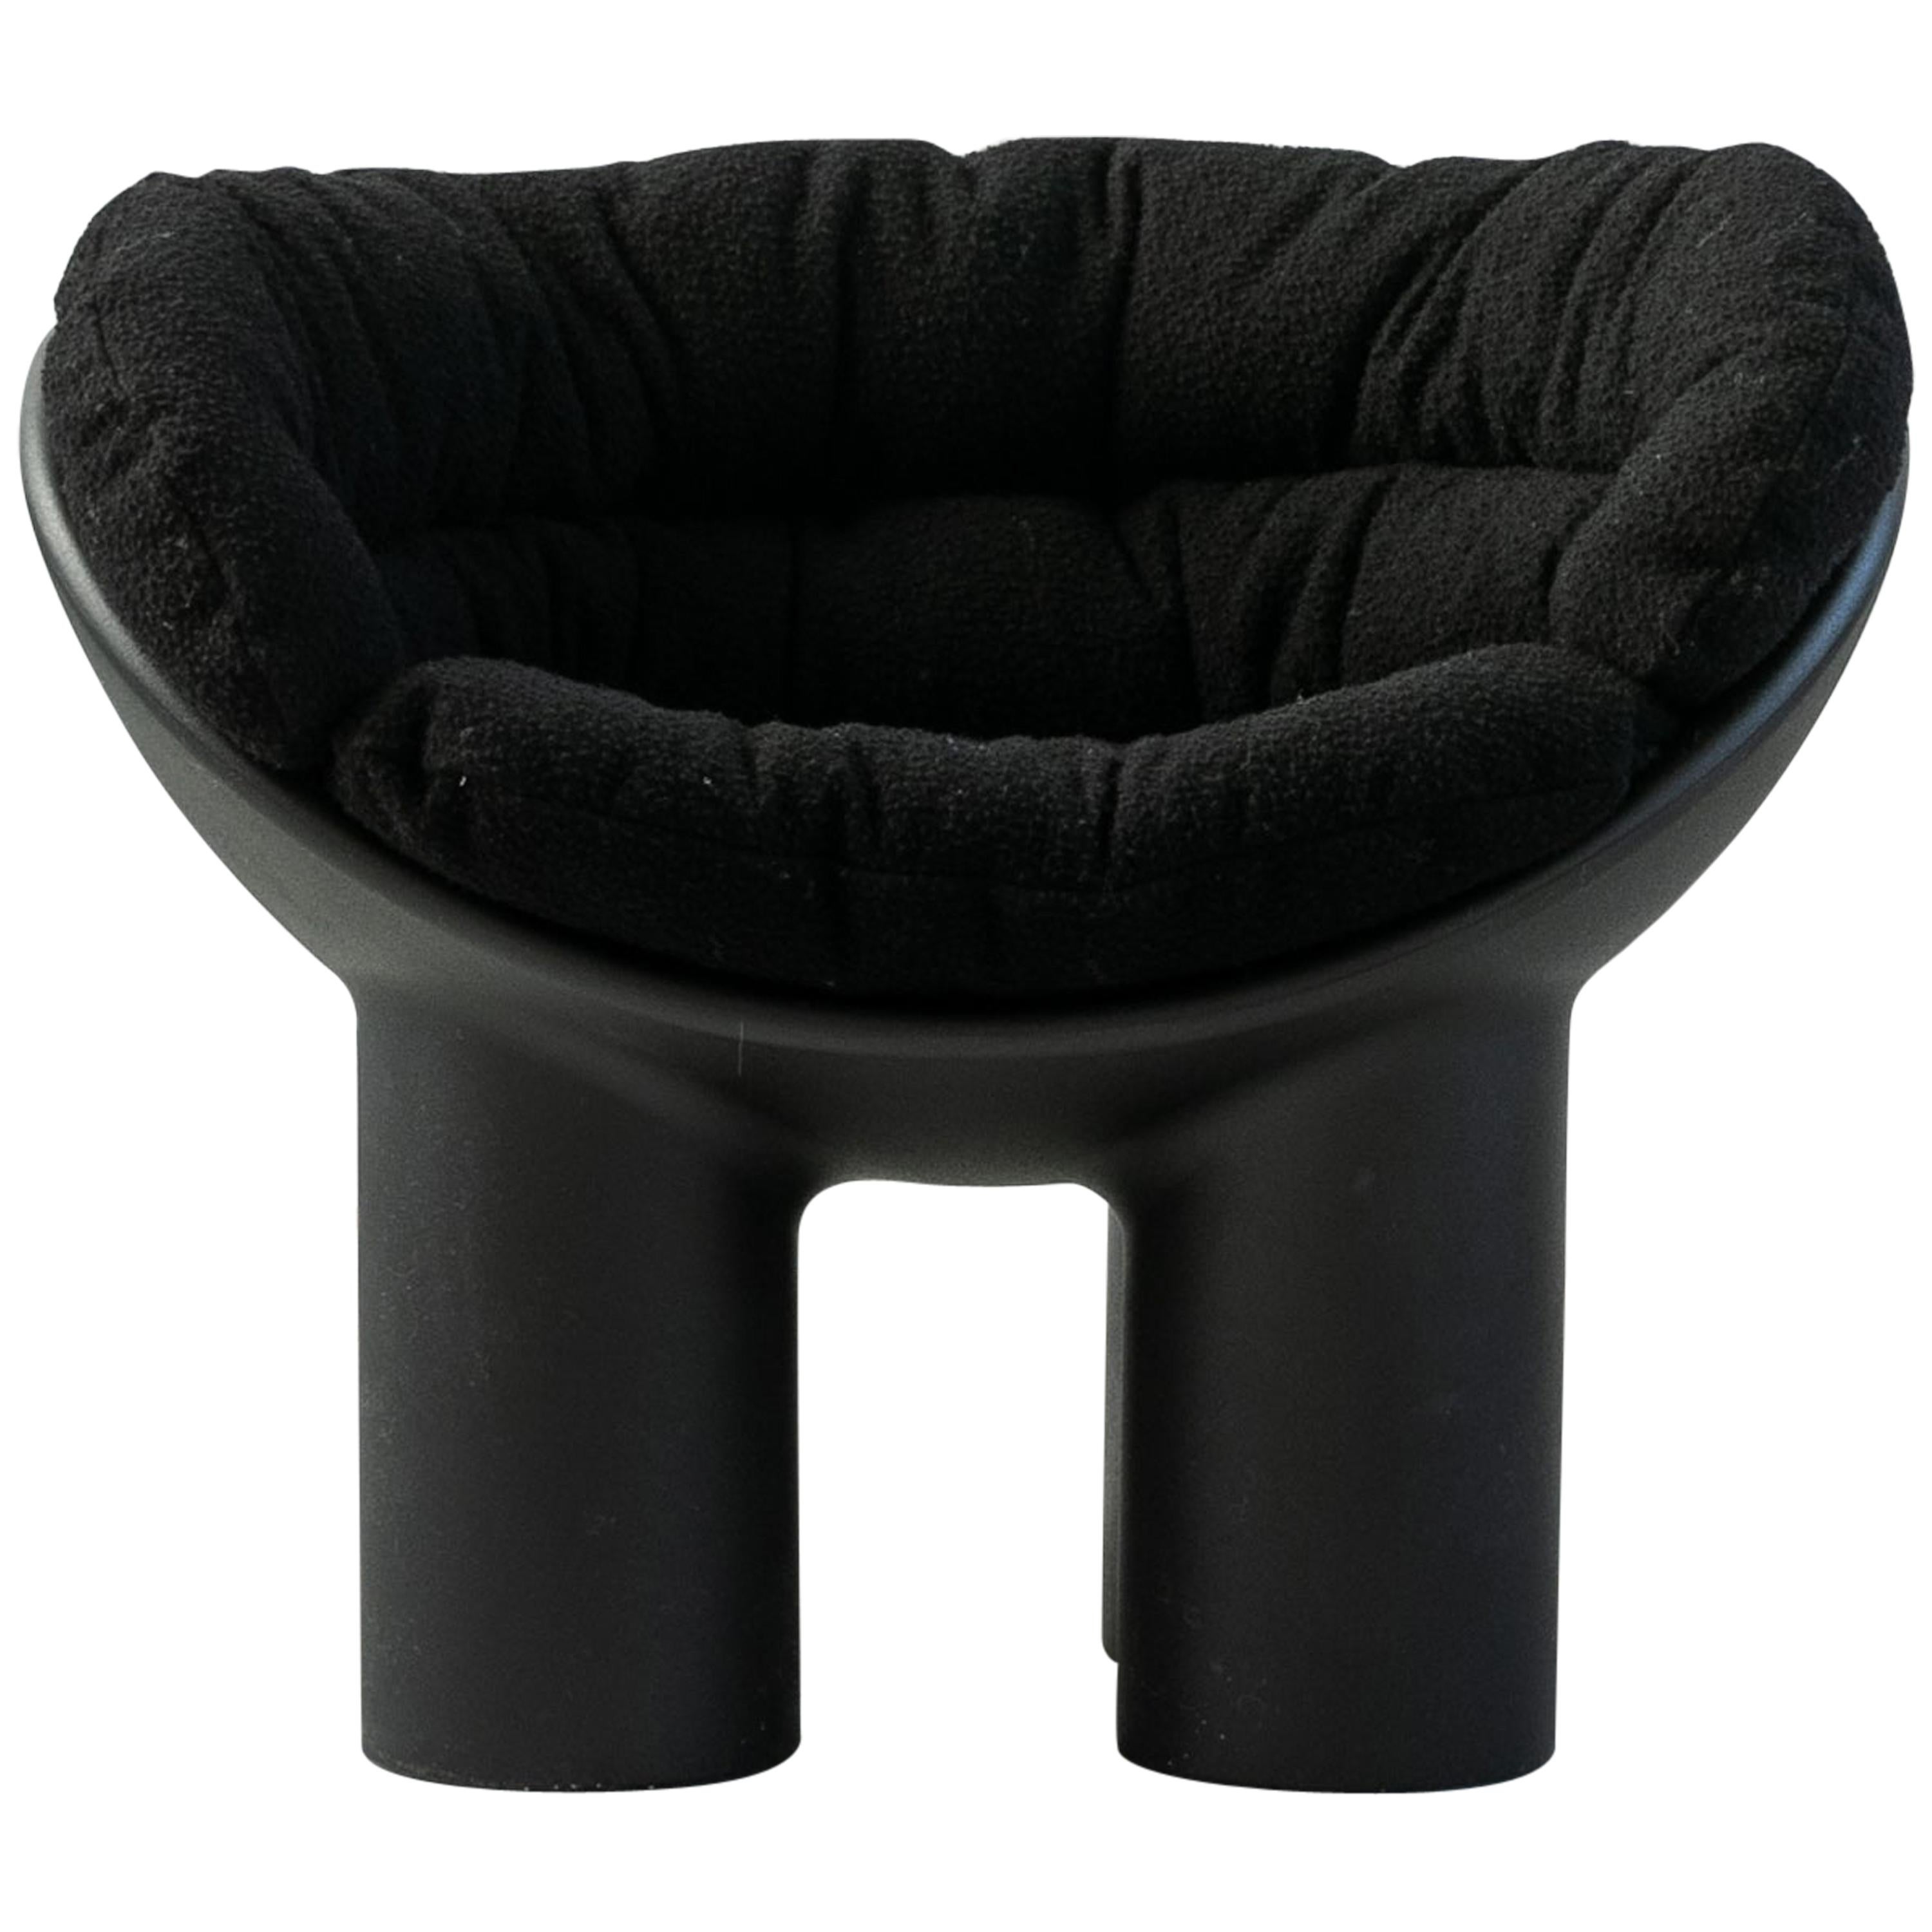 Roly Poly Armchair in Black by Faye Toogood with Casentino cushions